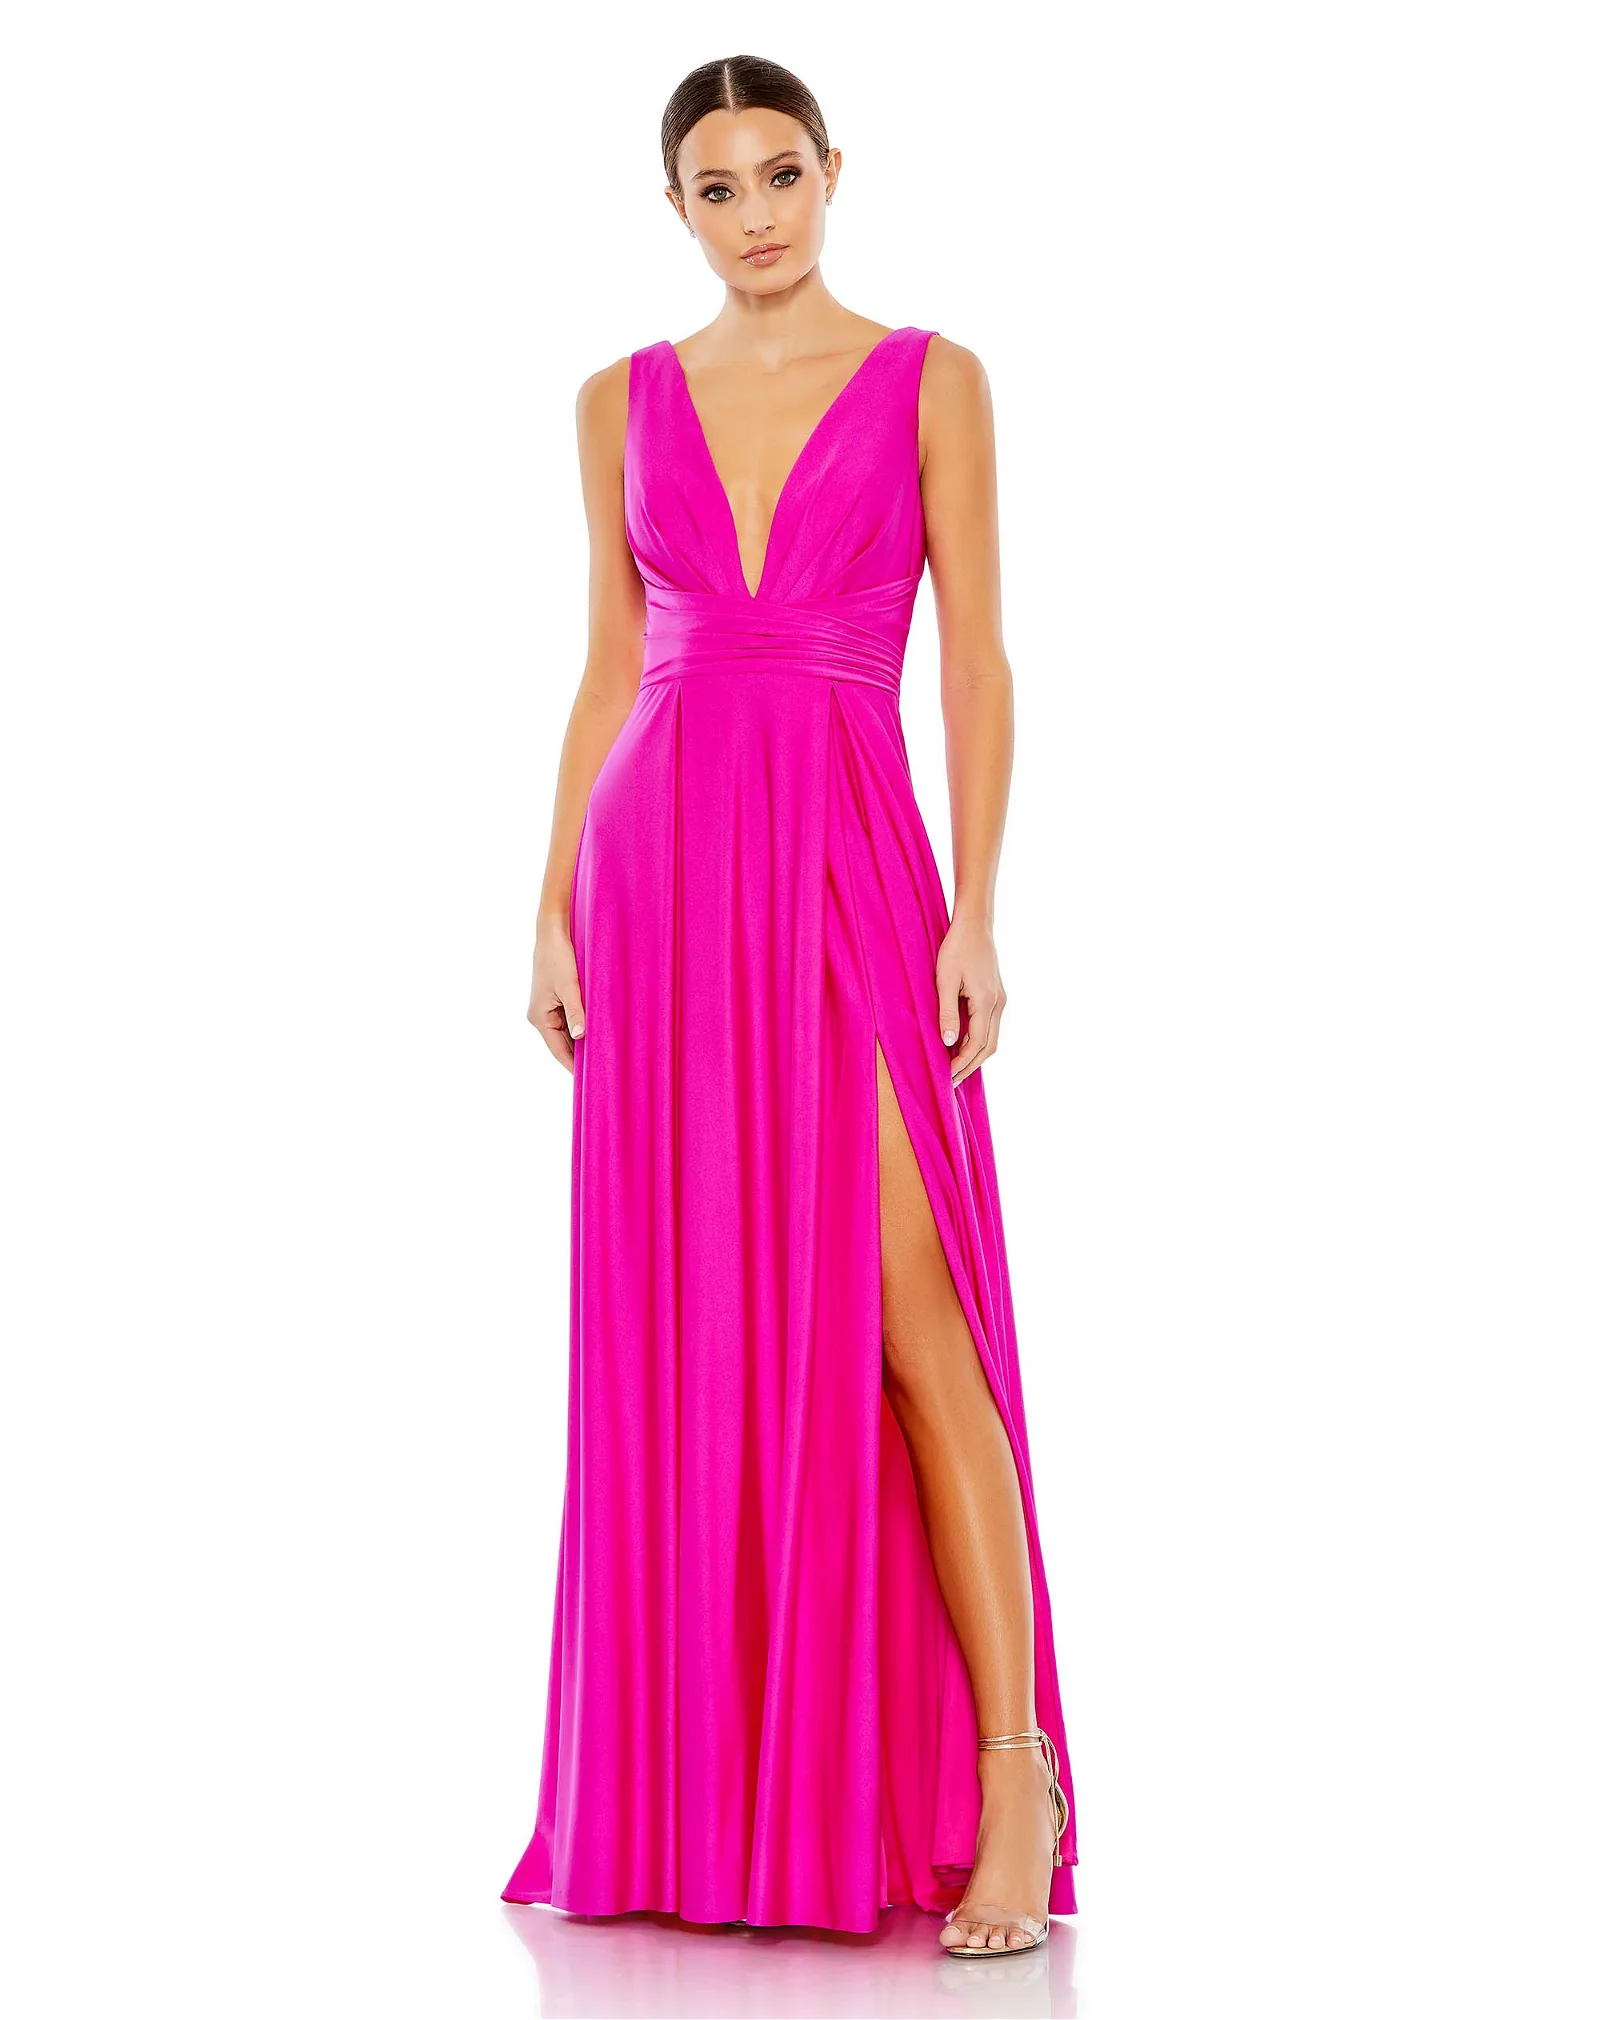 Image of Jersey Plunge Neck Evening Gown